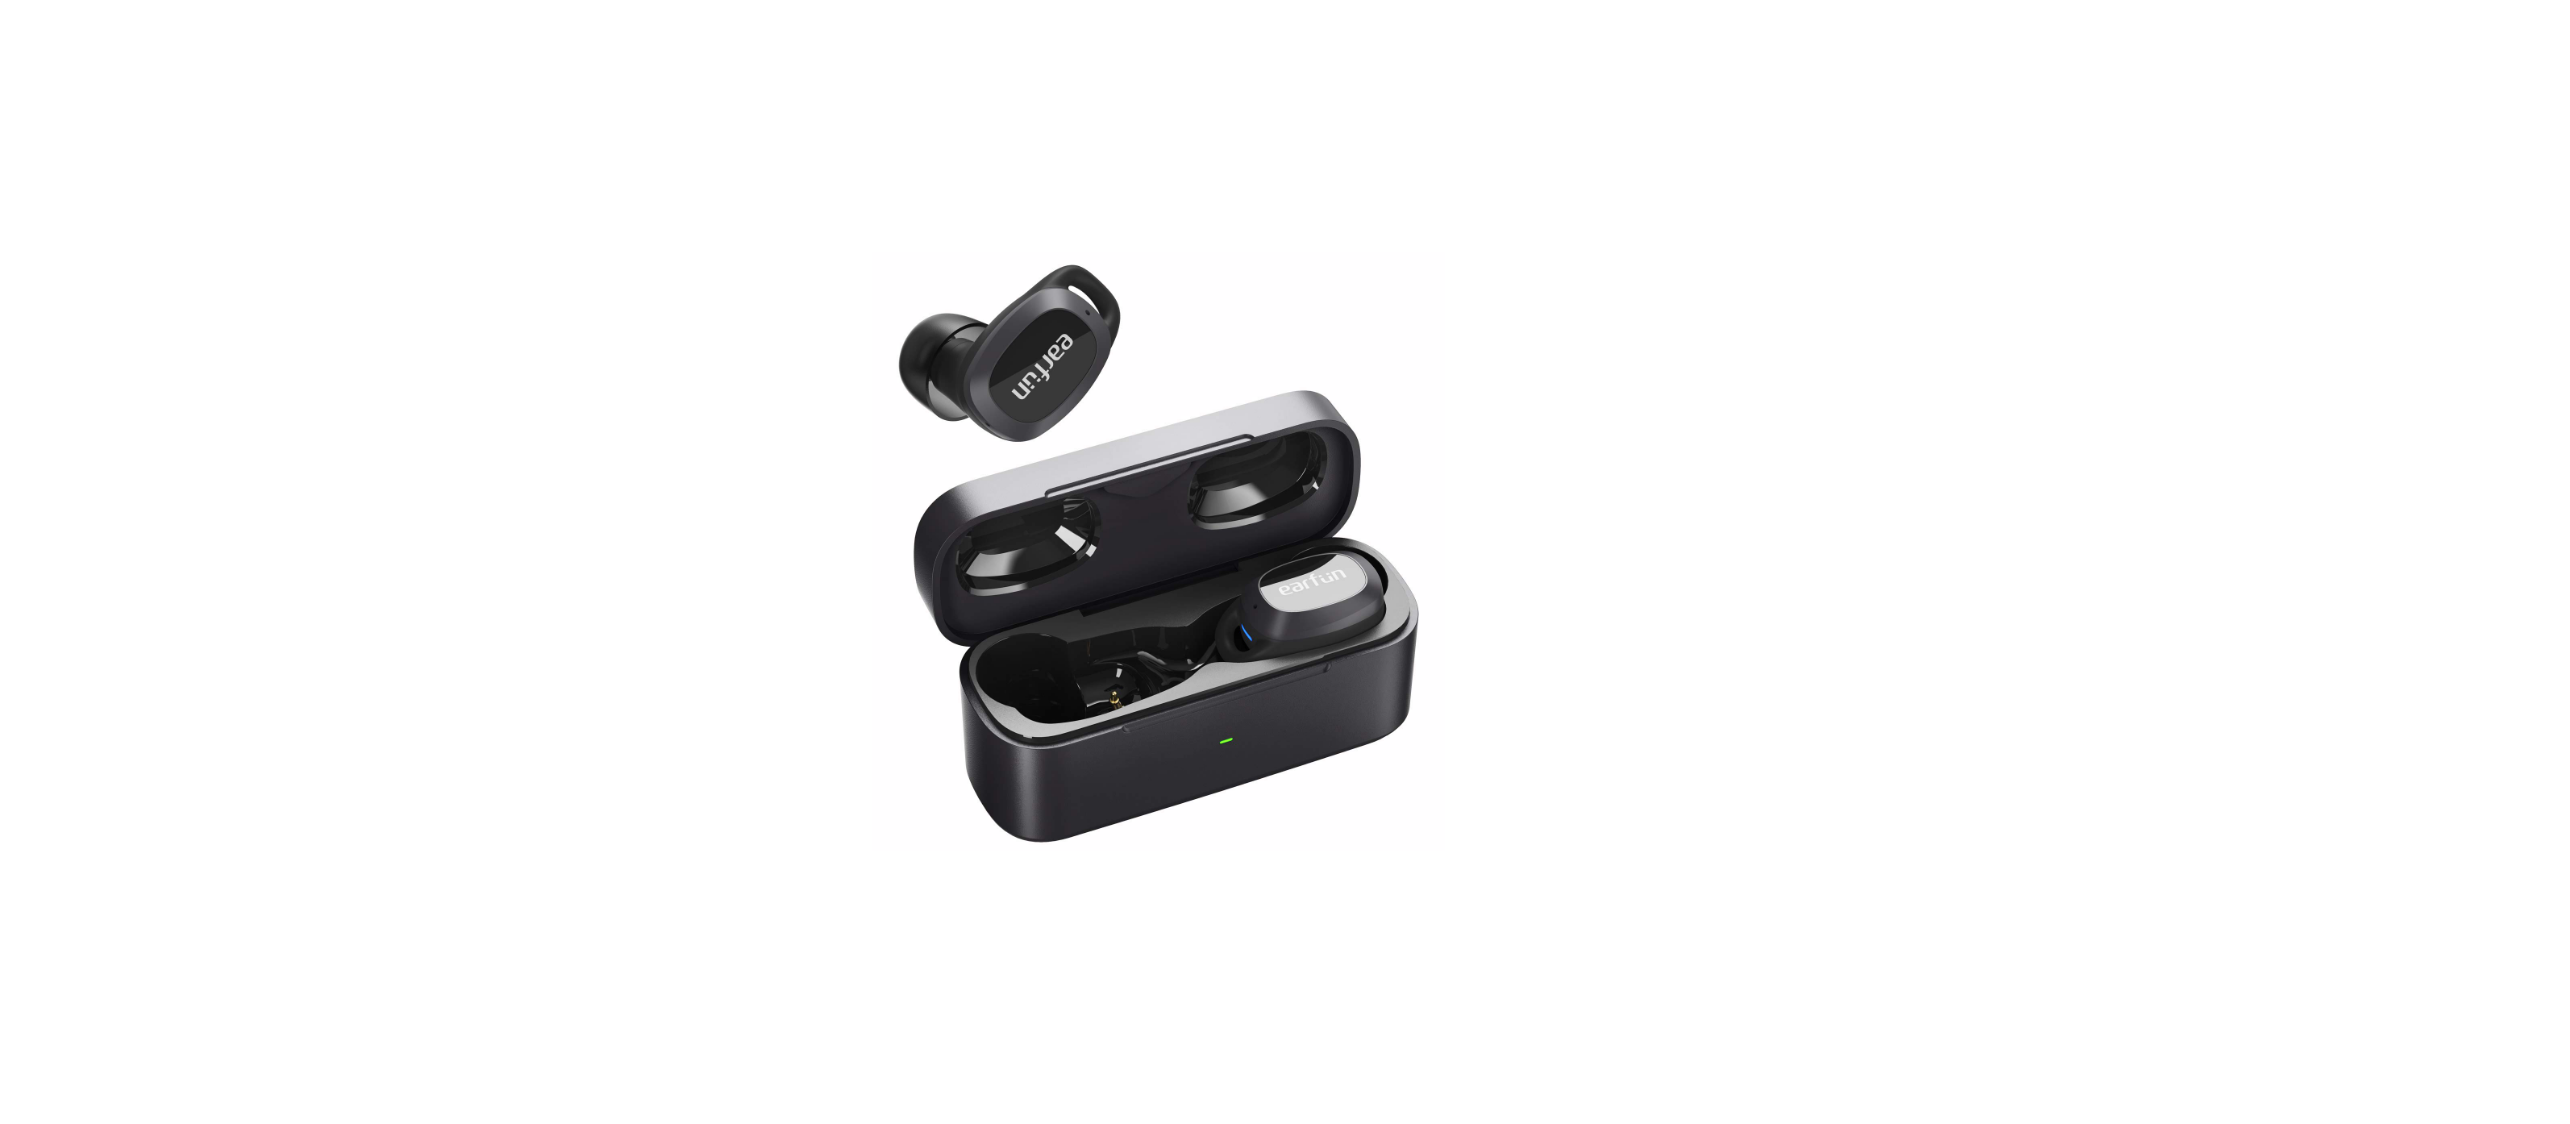 You are currently viewing EarFun Free Pro 2 Hybrid ANC True Wireless Earbuds Guide